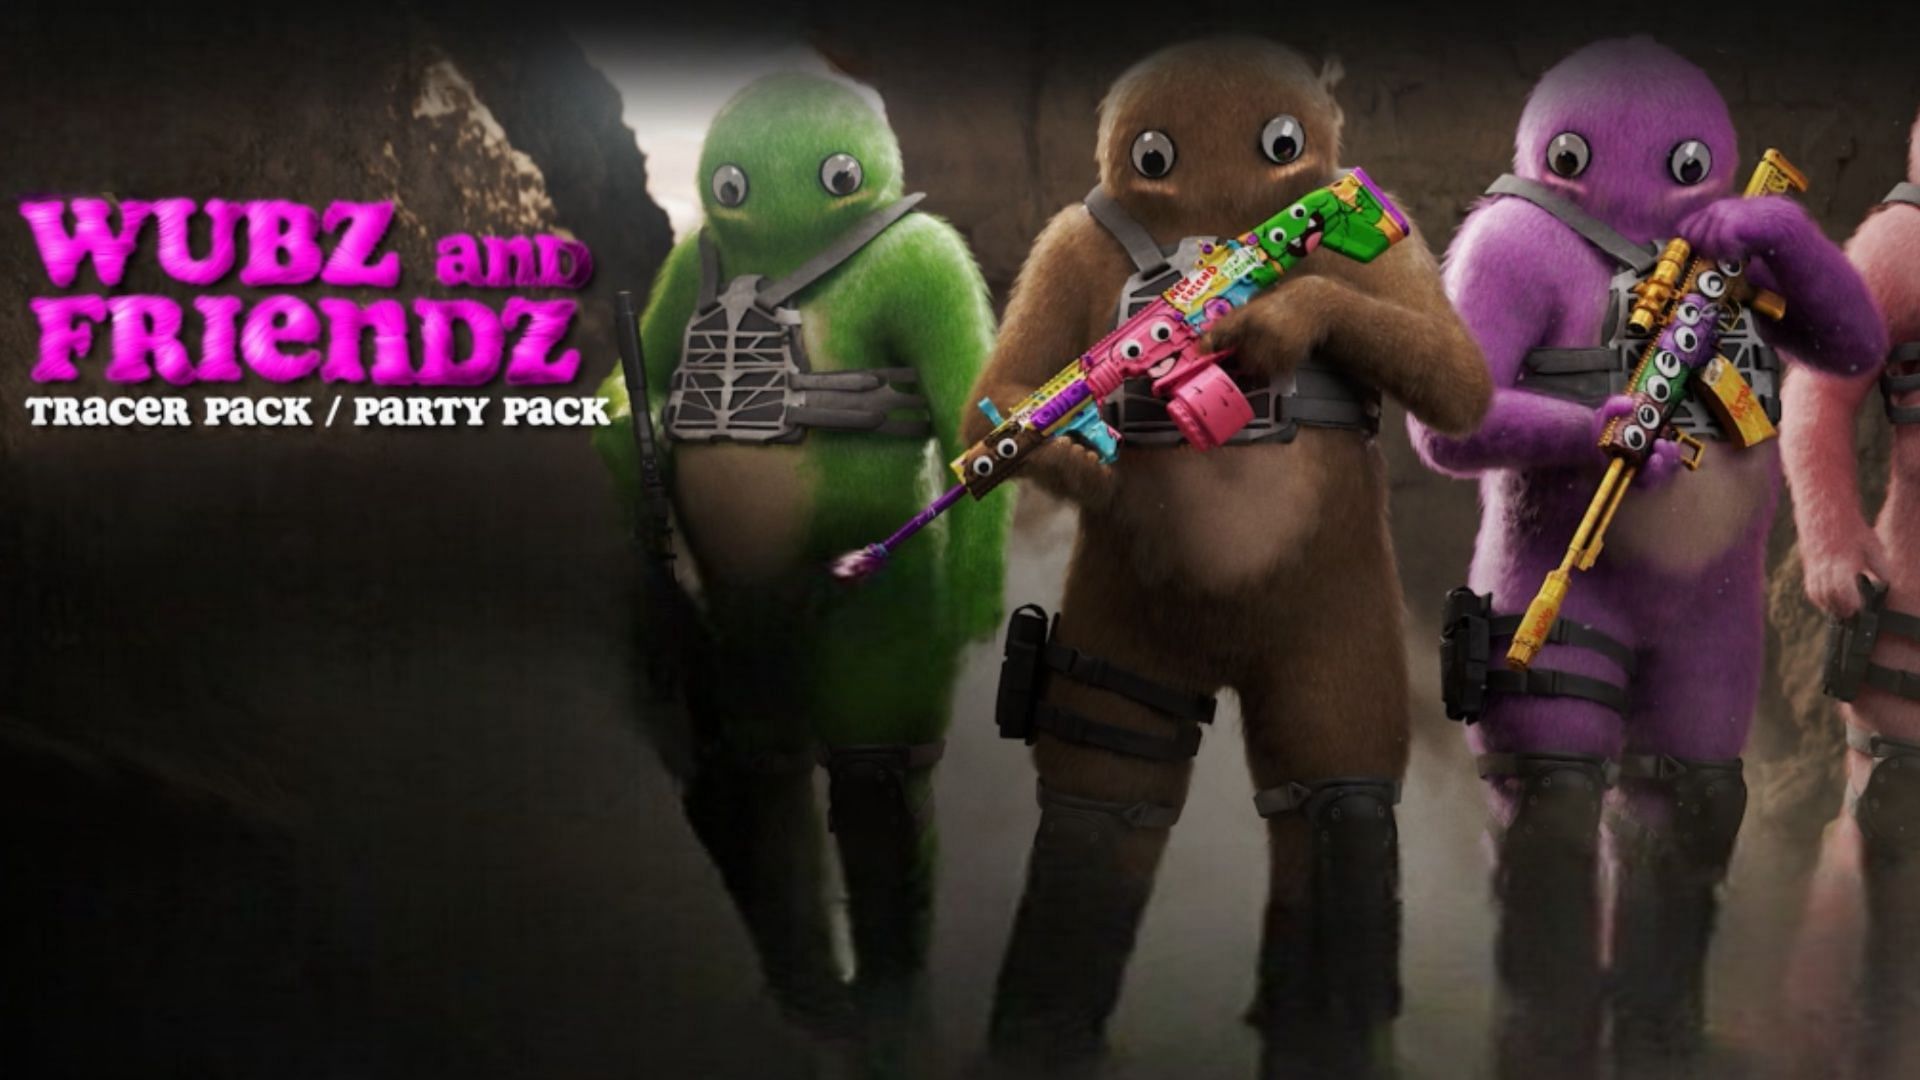 Wubz and Friendz Party Pack in MW3 and Warzone (Image via Activision)